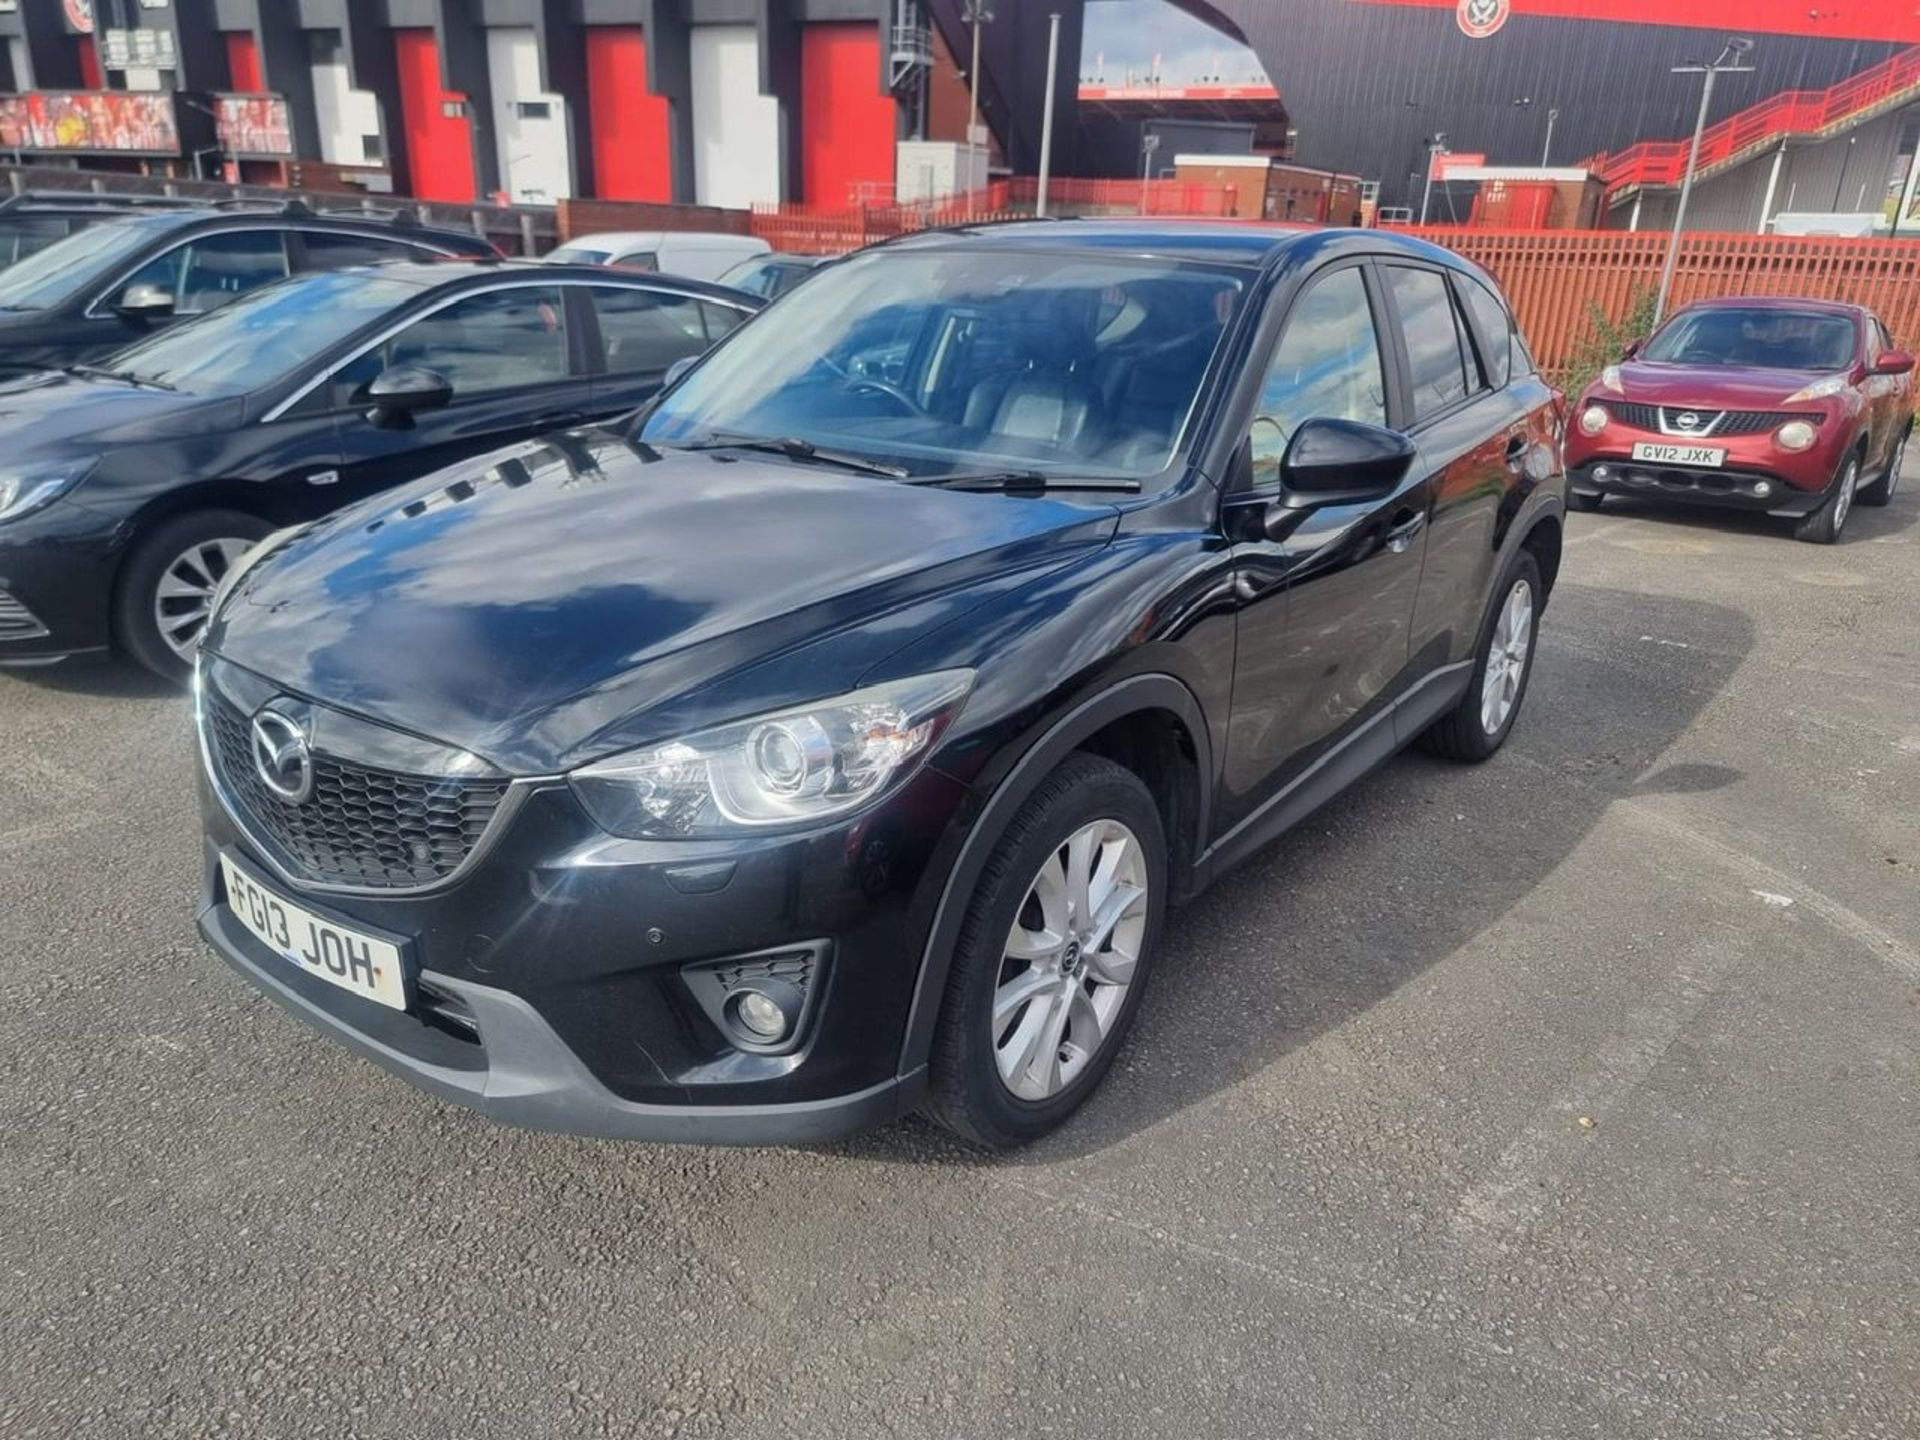 FG13 JOH MAZDA CX-5 2.2 D 150 SPORT 2WD Station Wagon. Comes with 1 key. Date of registration: 21/ - Image 9 of 9